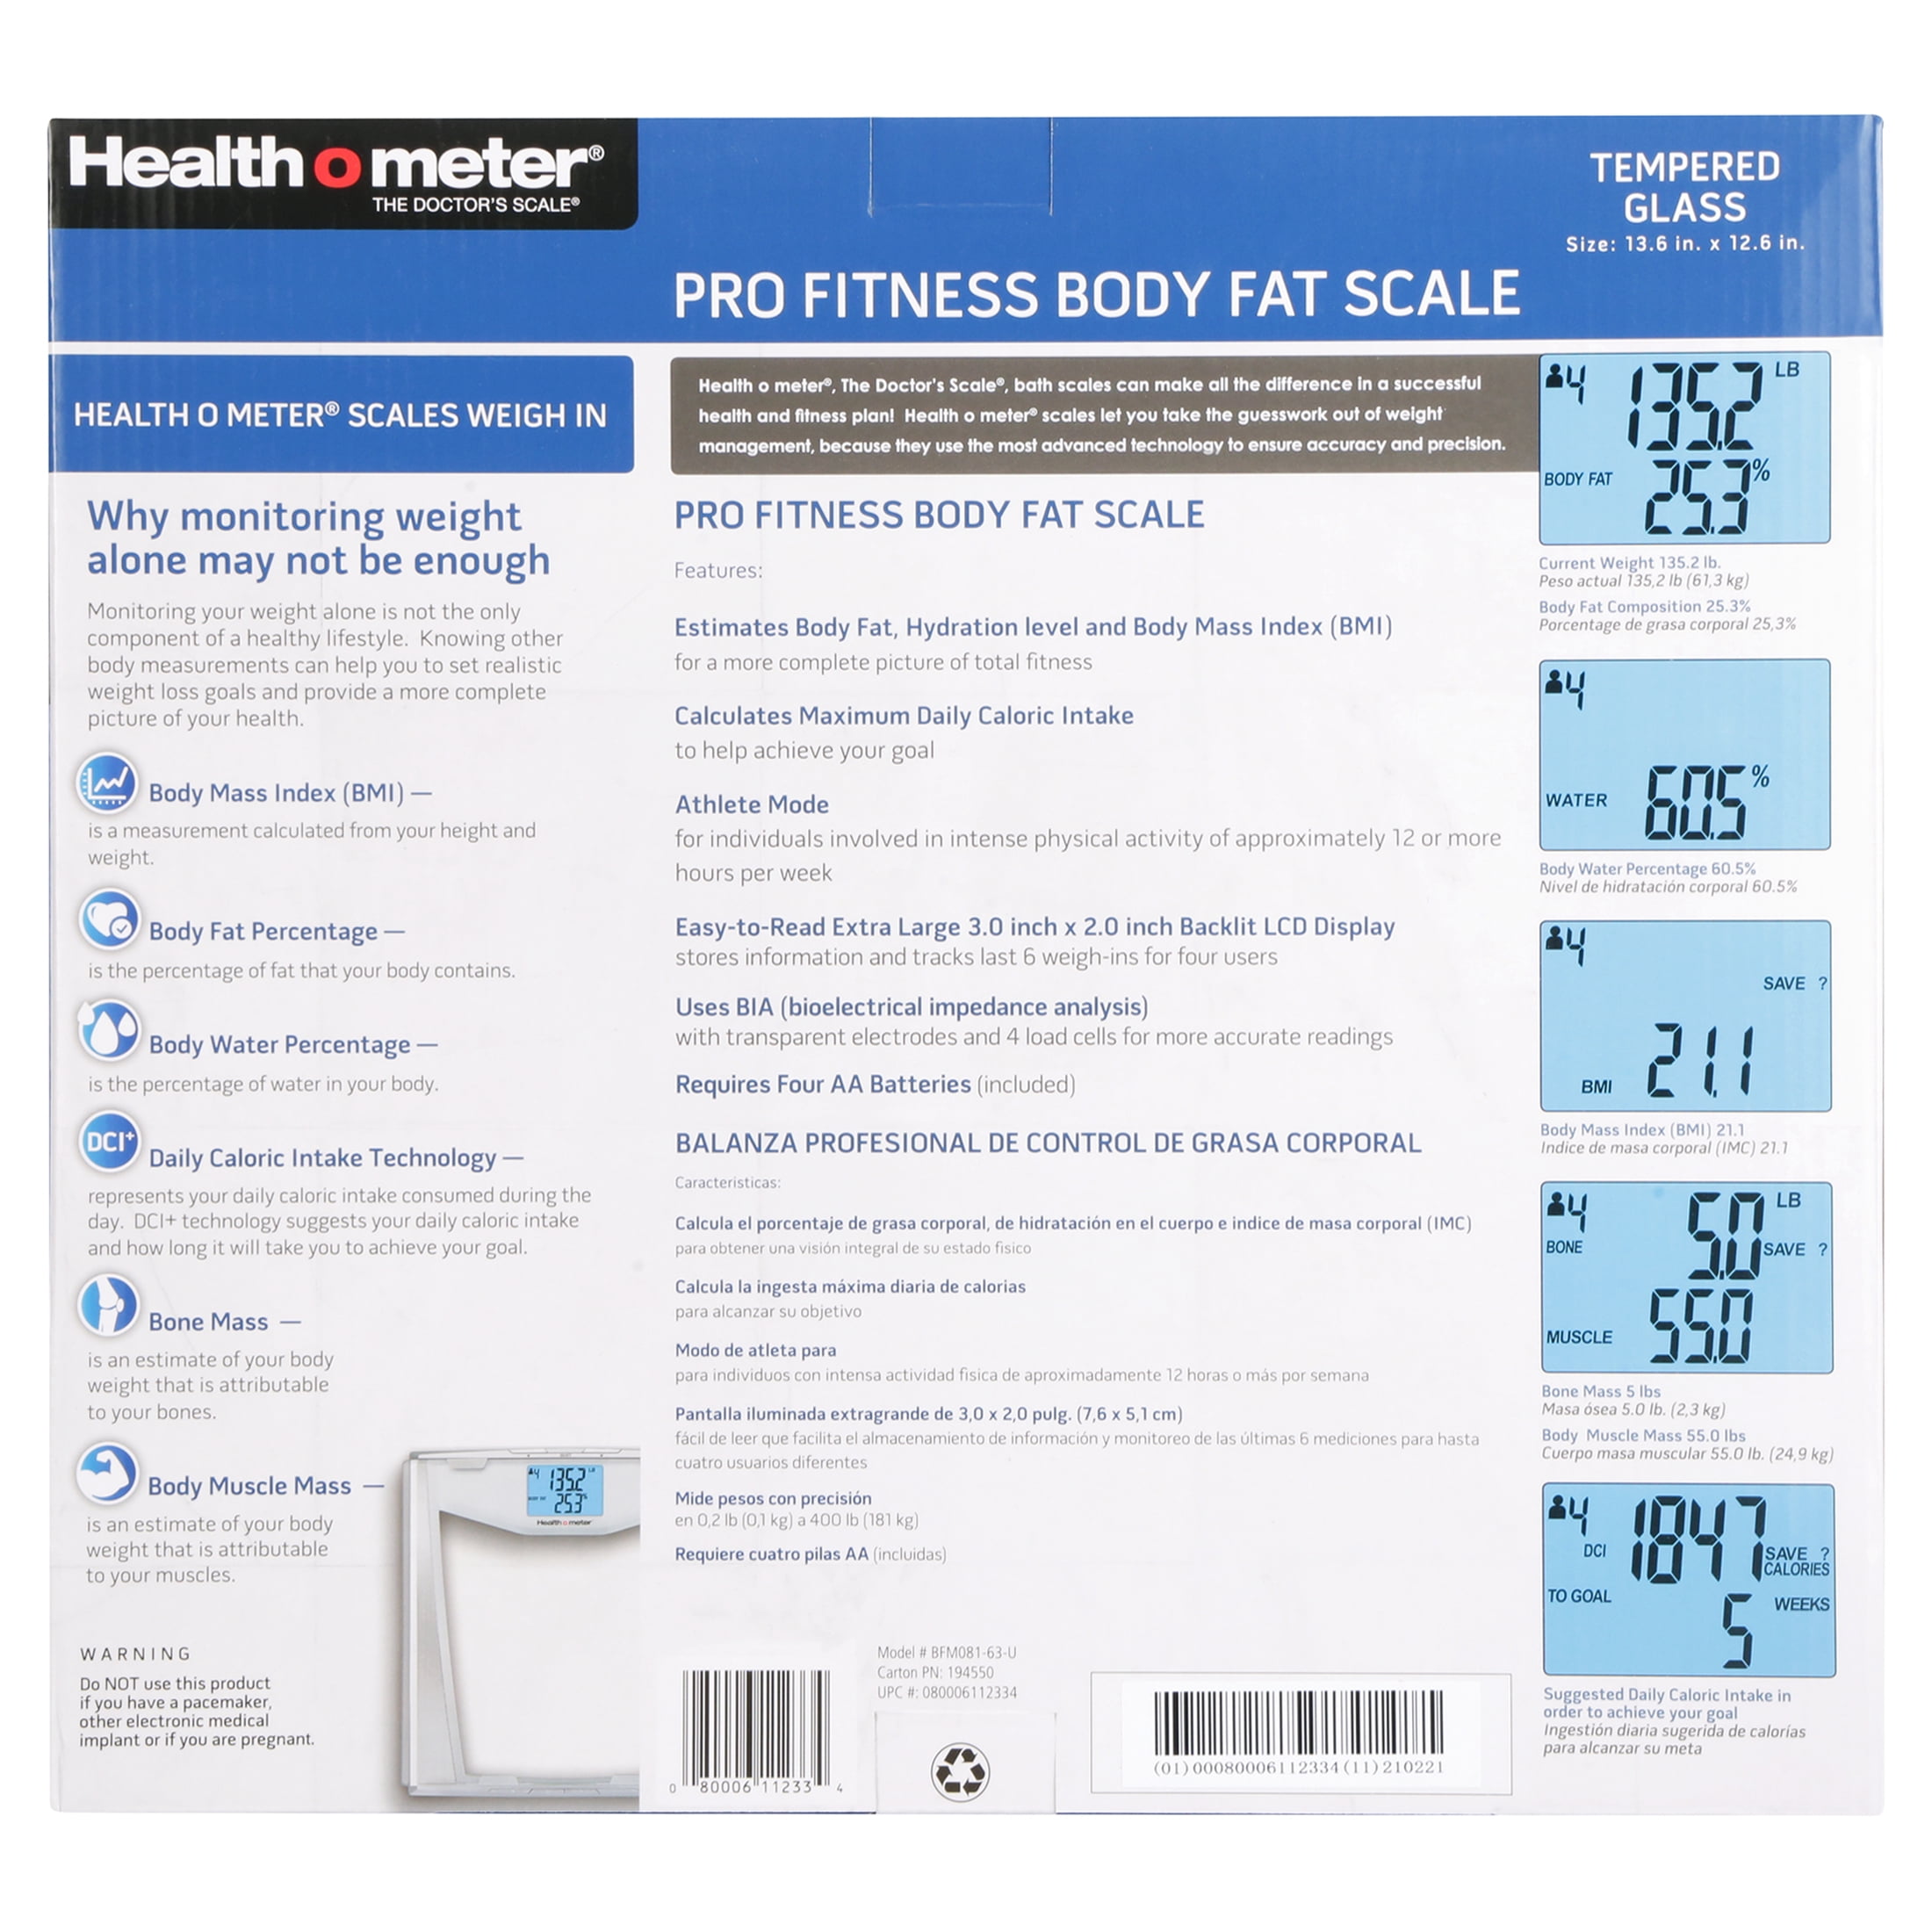 Health O Meter Weight Tracking Plus Scale Stainless Steel, 1.0 CT